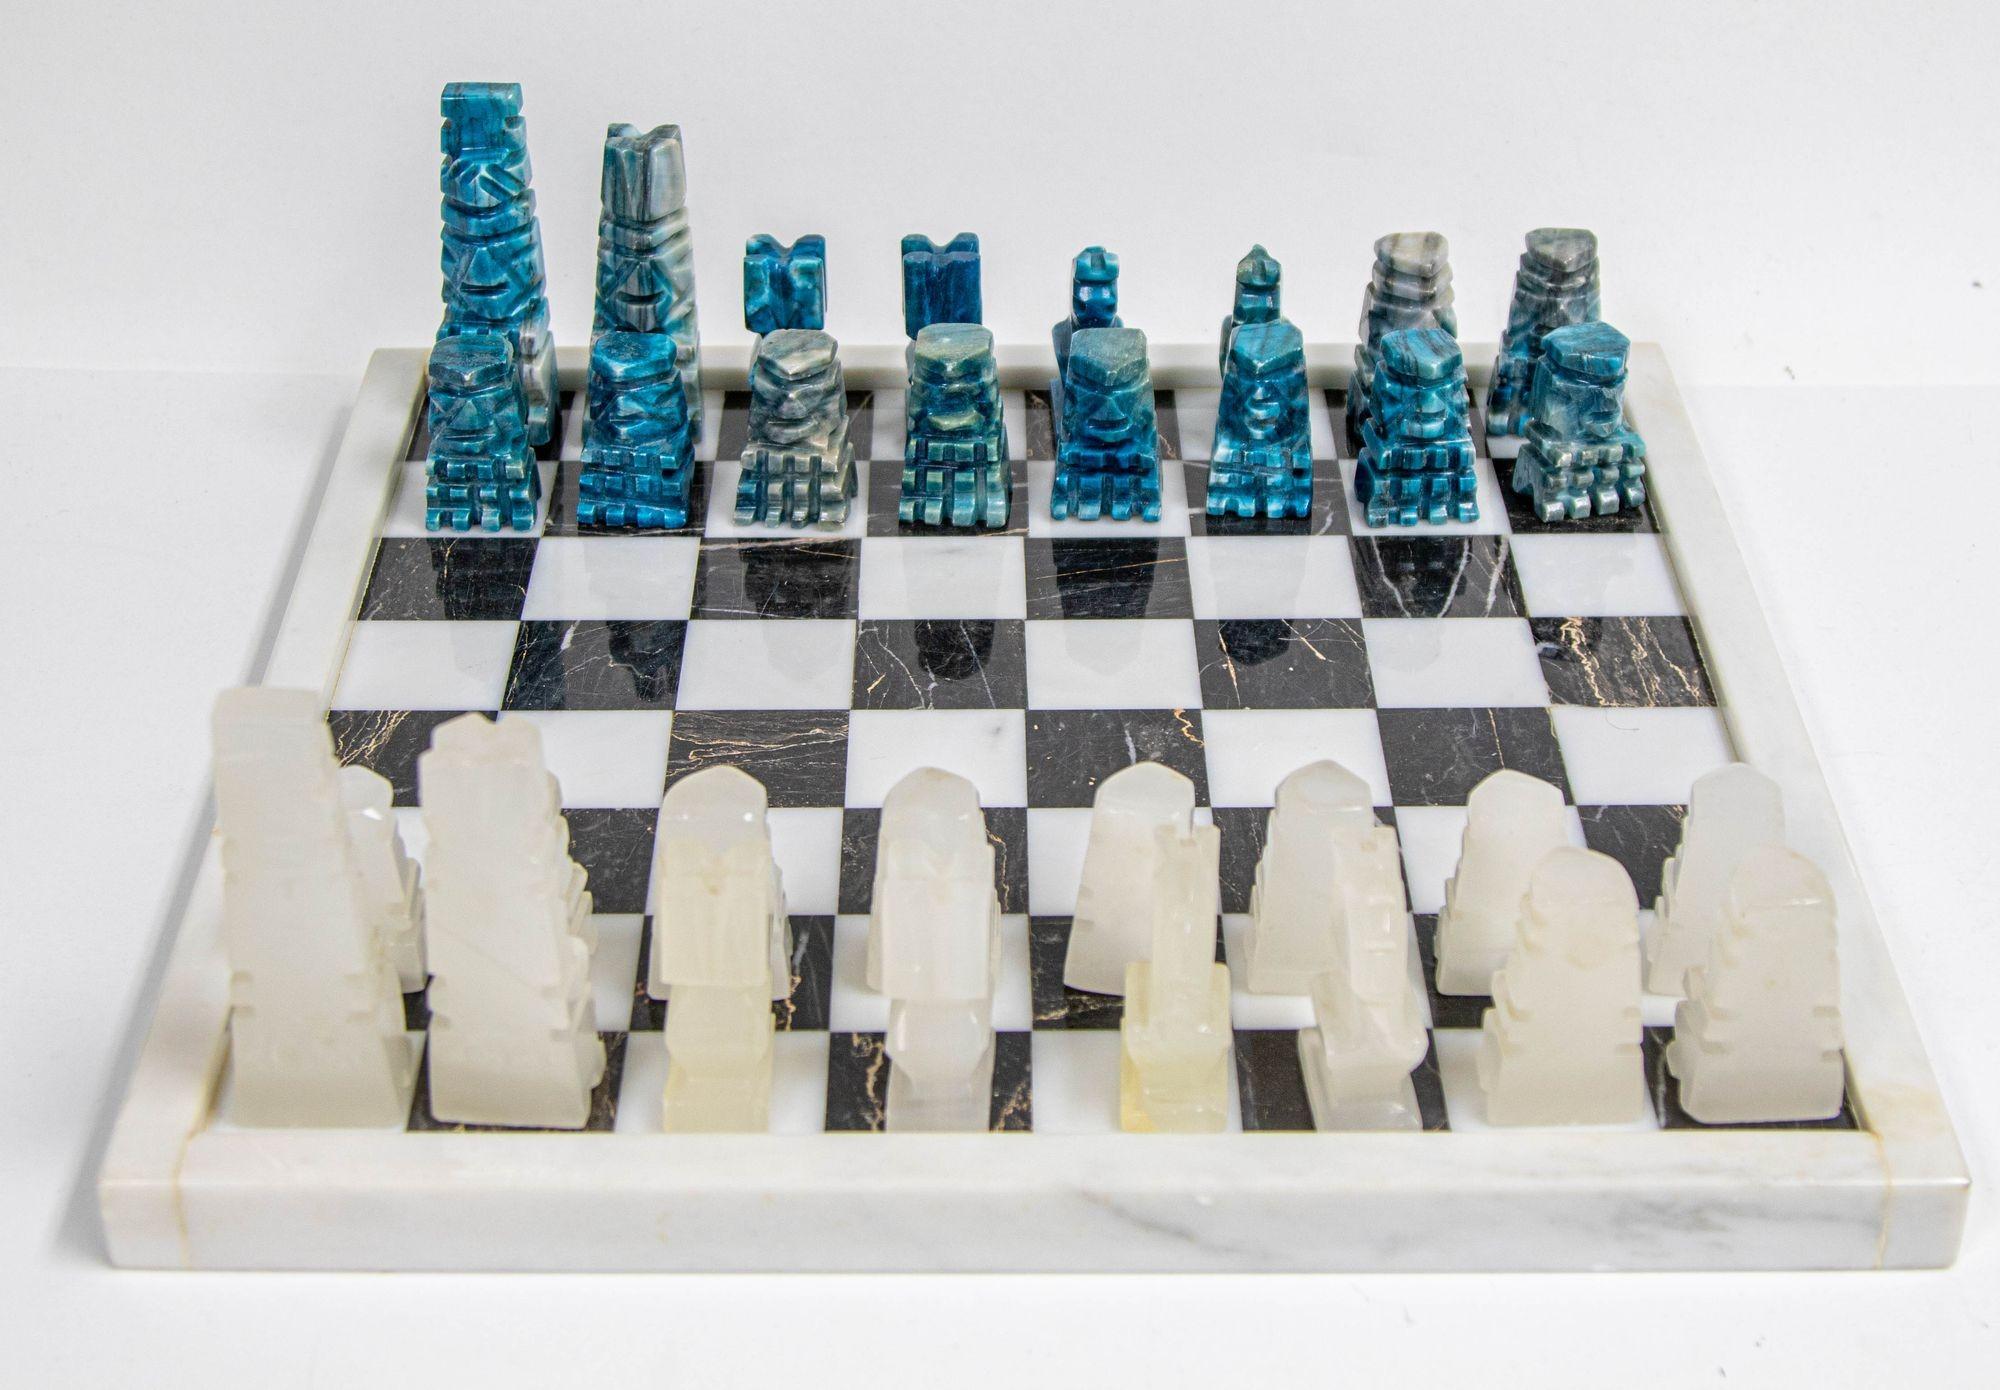 Grand jeu d'échecs vintage en marbre avec pièces en onyx turquoise sculptées à la main
Vintage mid 20th century Mexican stone marble chess set complete chess board in white and black marble stone with elaborately hand carved turquoise and white